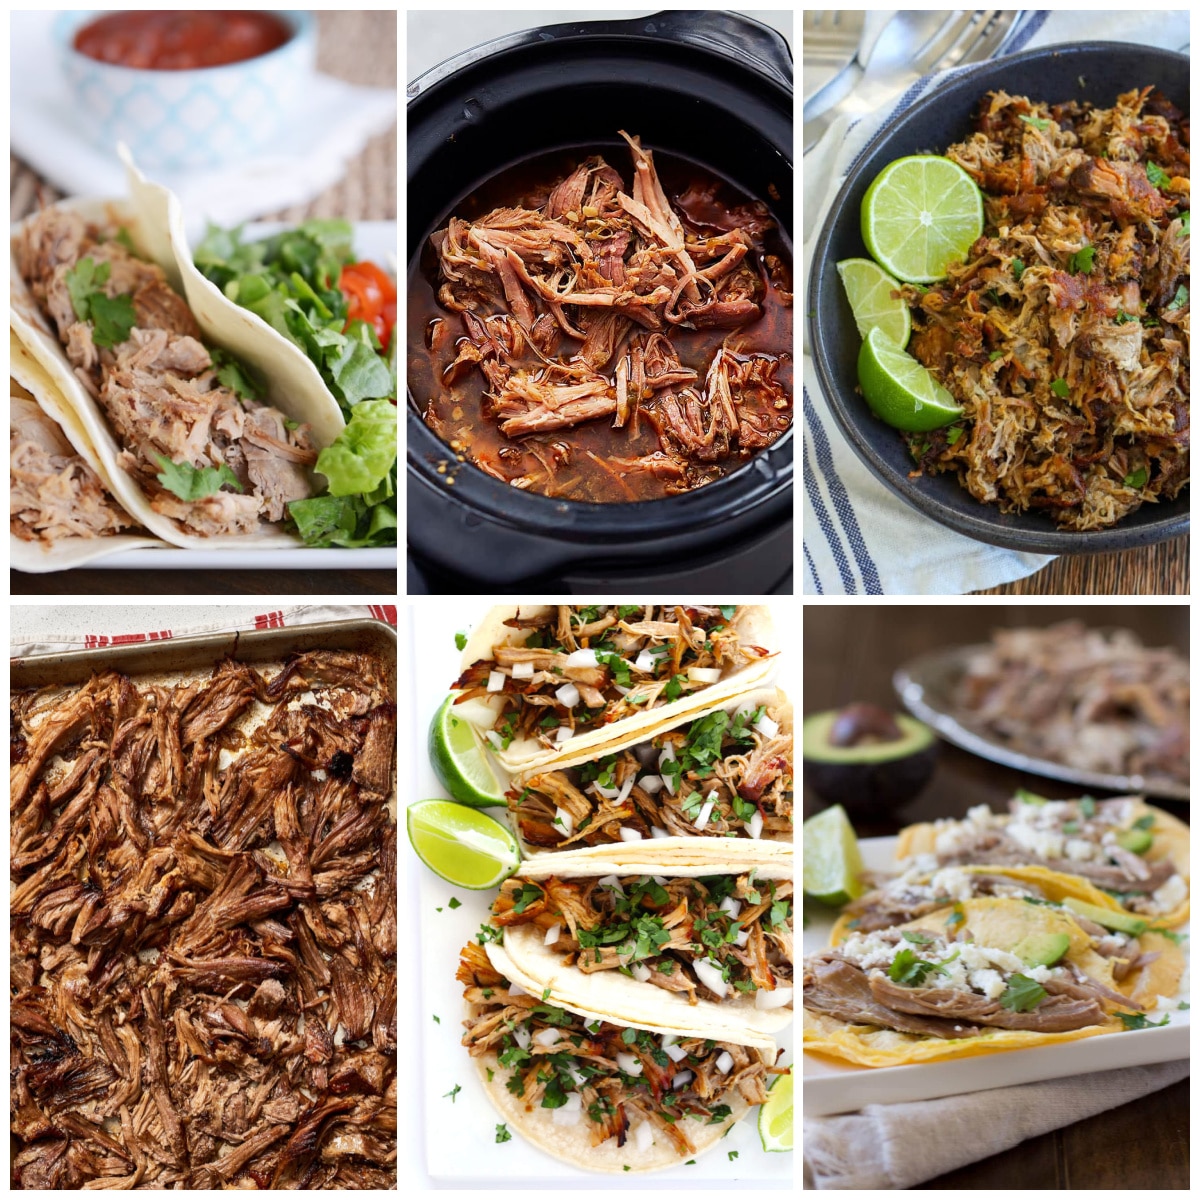 Slow Cooker Pork Carnitas Recipes collage of featured recipes